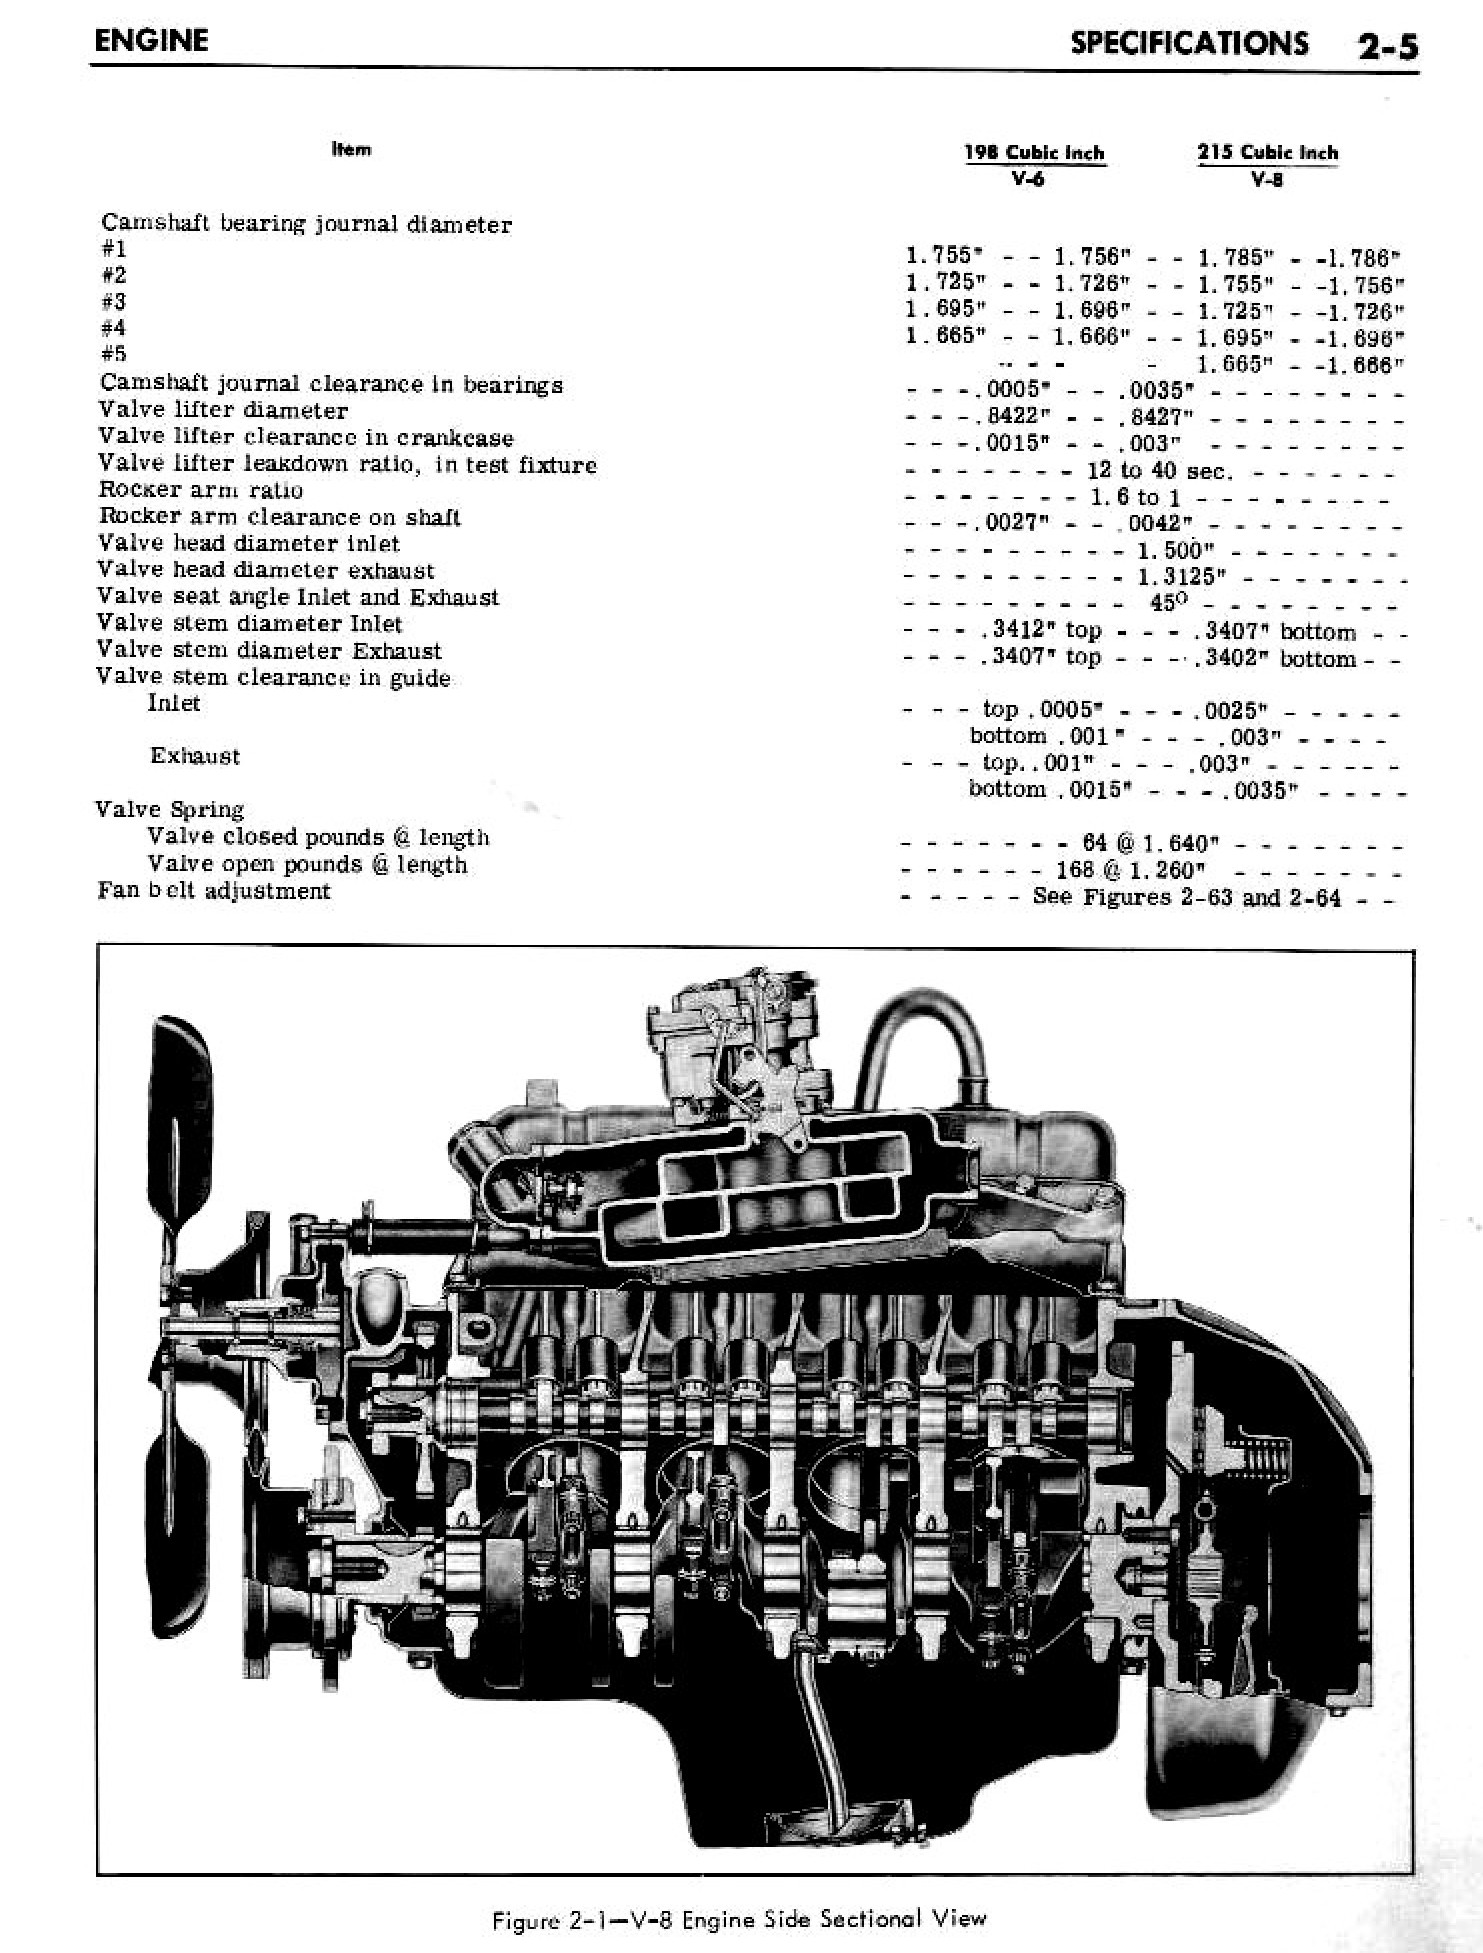 1962 Buick Special Service Manual - Engine Page 5 of 59